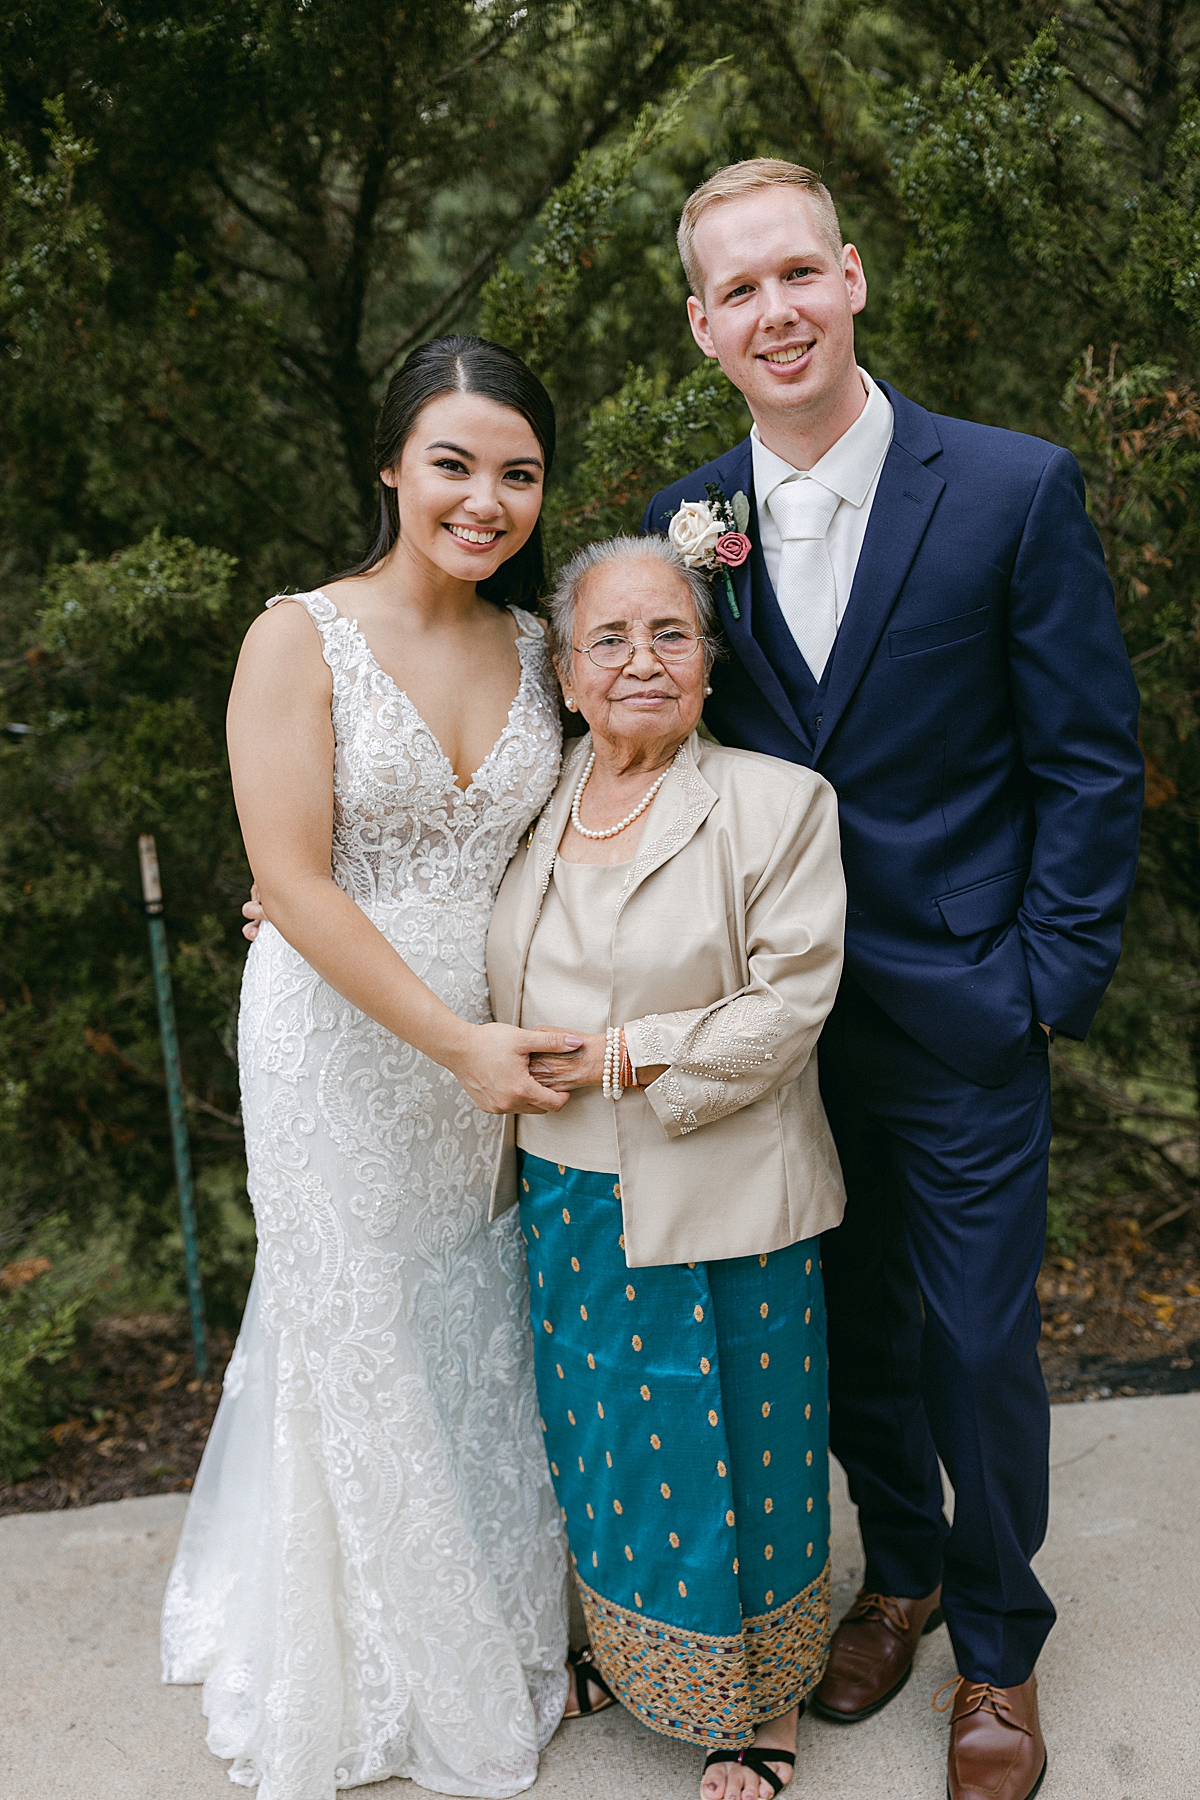 grandmother with bride and groom portrait